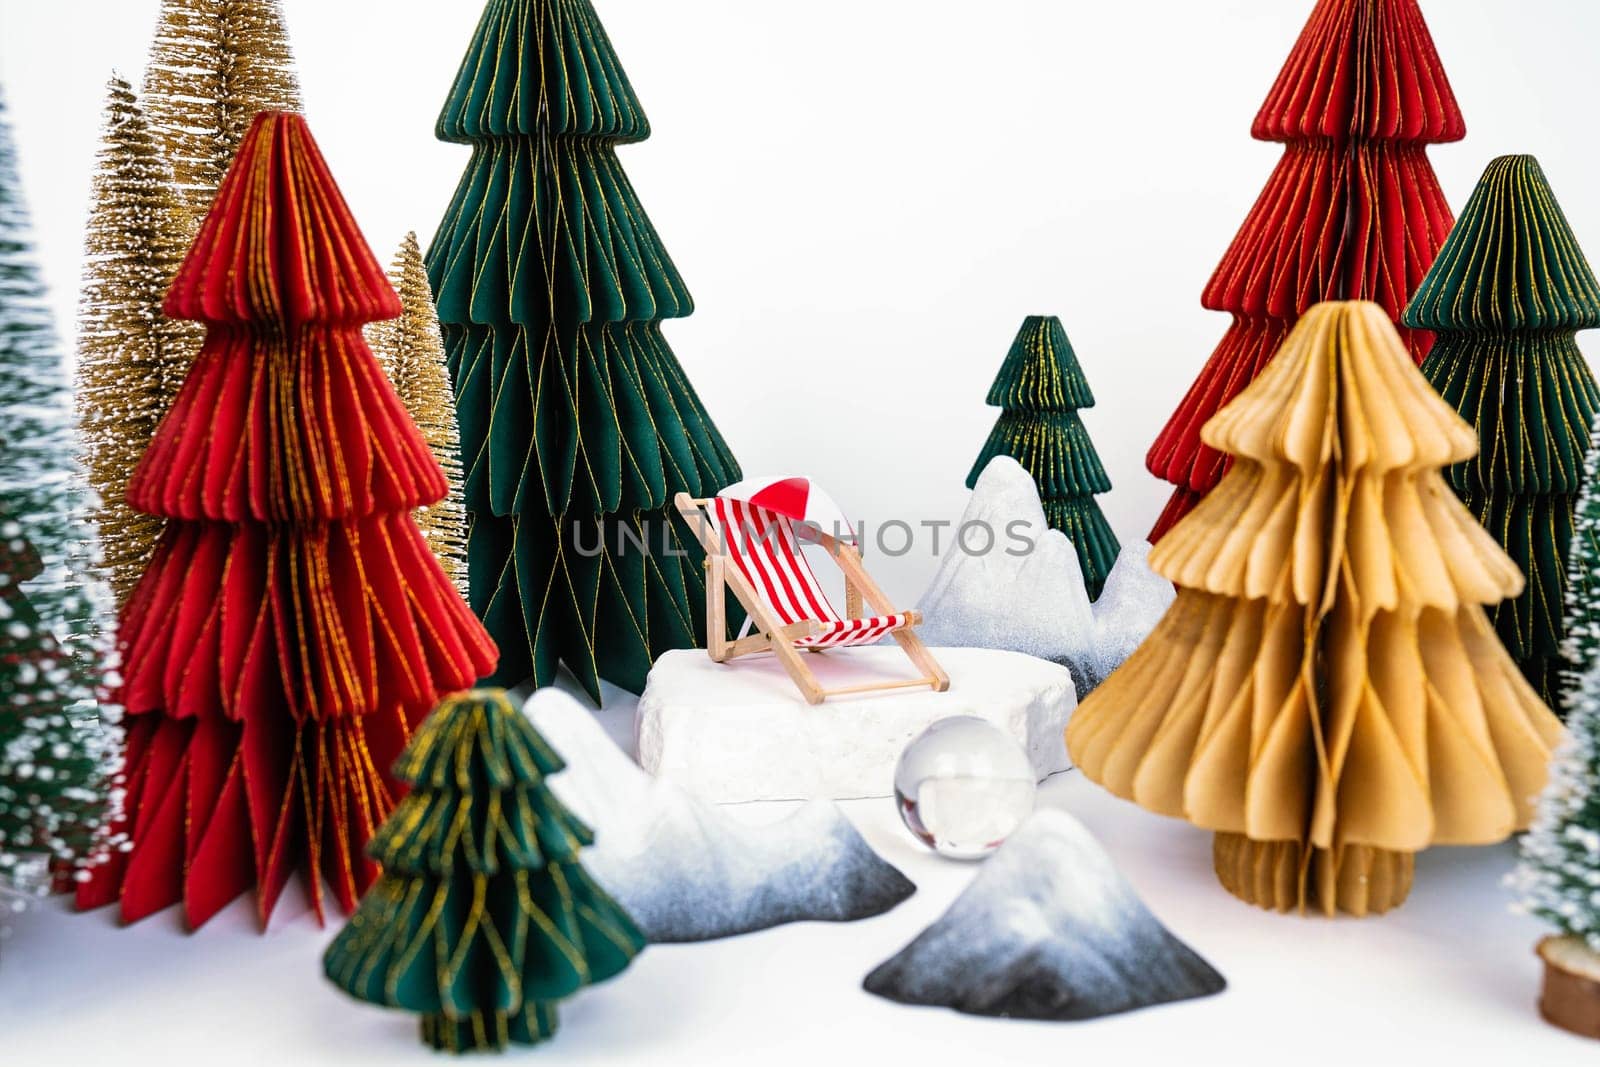 Christmas background with colorful Christmas trees. New Year's Greeting Card by tewolf